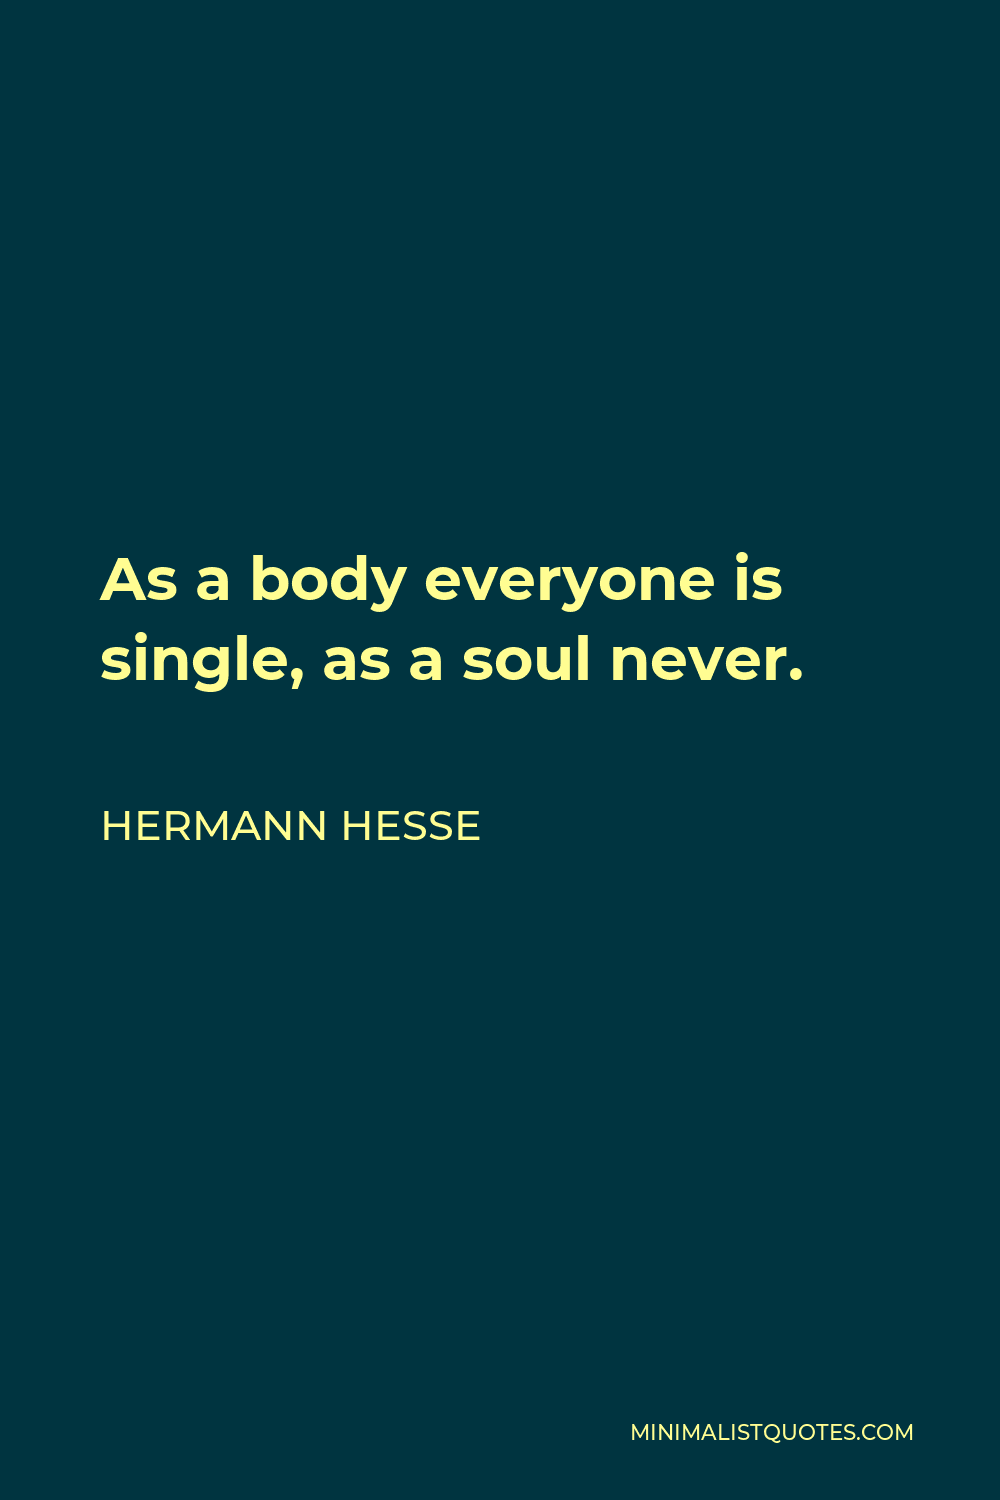 Hermann Hesse Quote - As a body everyone is single, as a soul never.